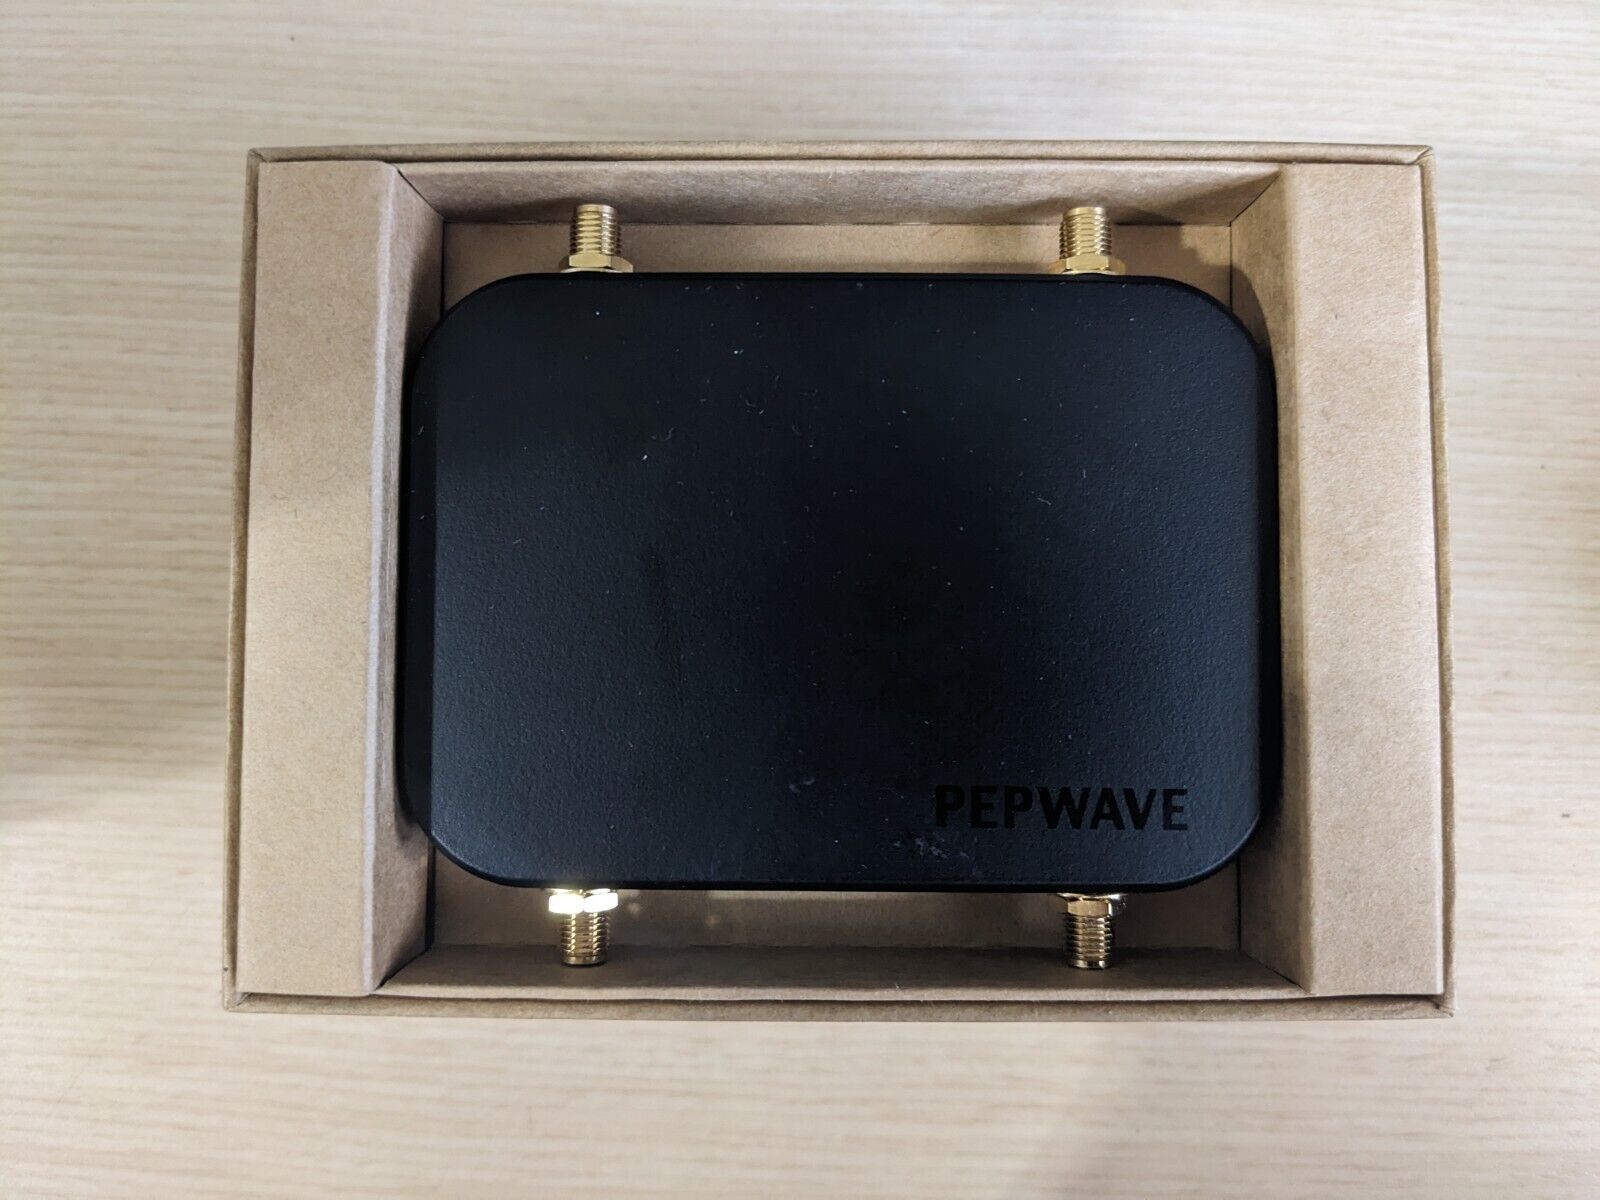 PEPWAVE Max Adapter Connect New Open Box